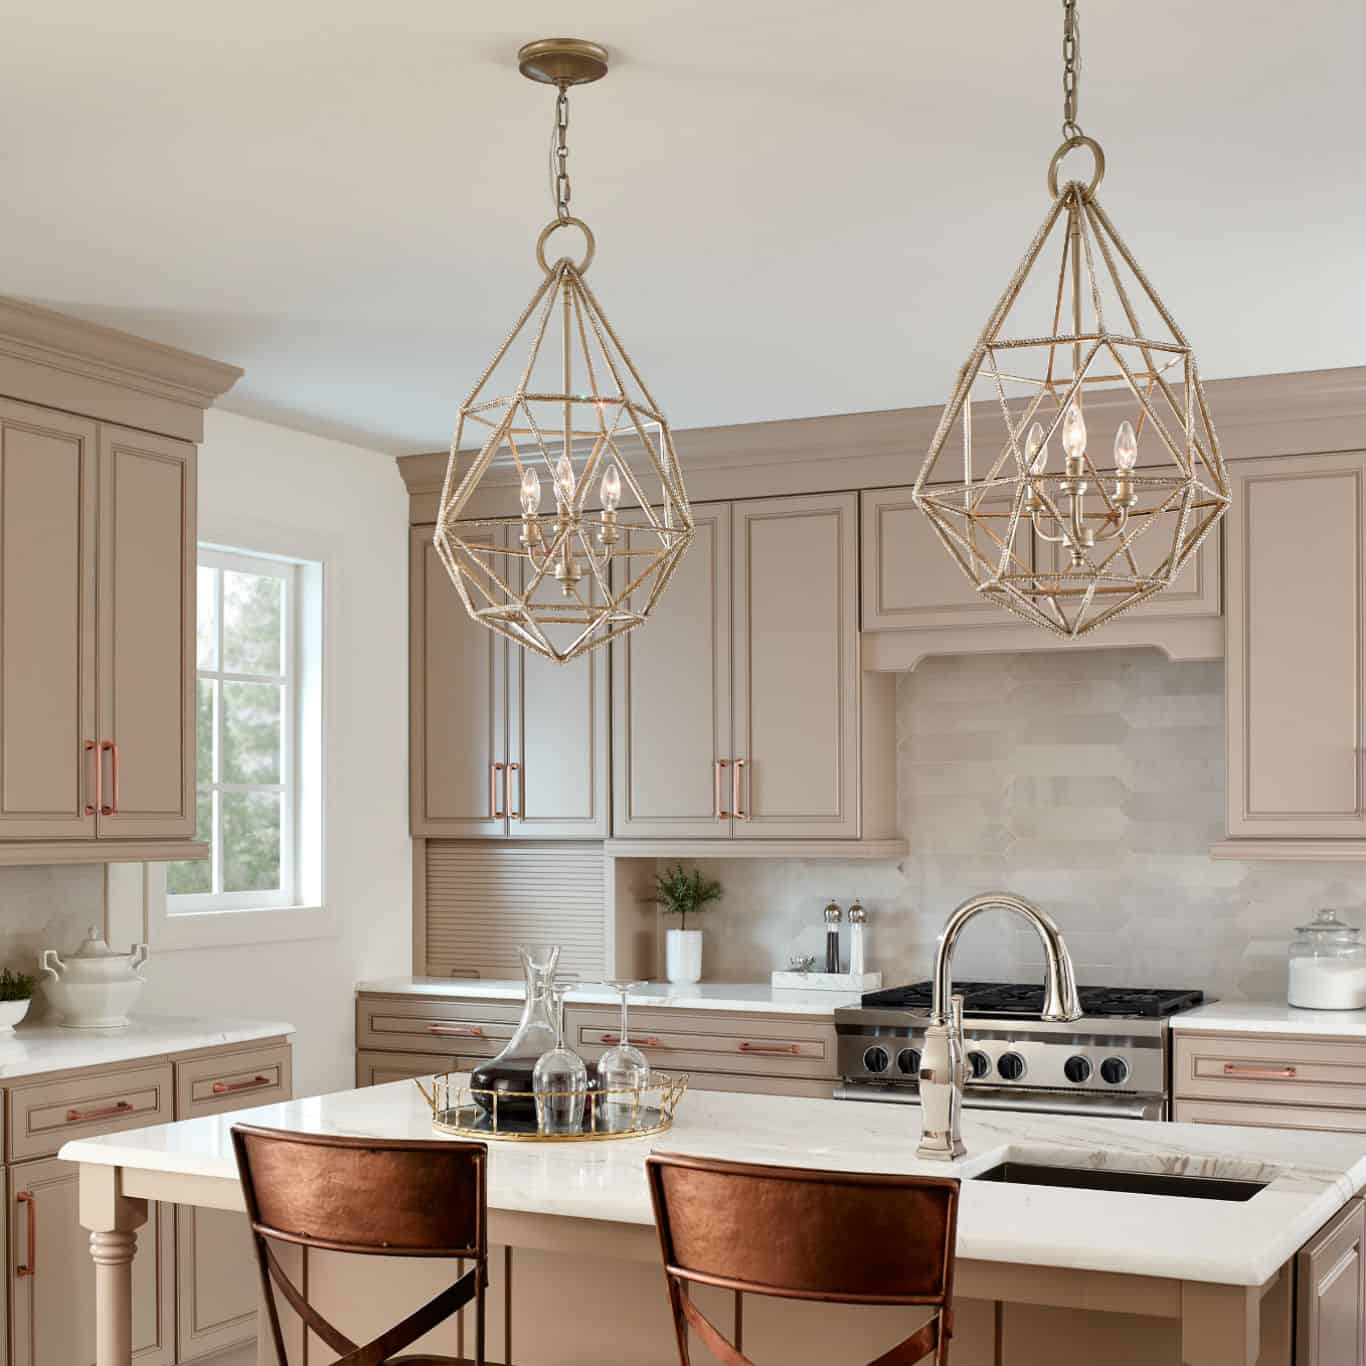 Light Fixtures 2022: Top 15 Trends to Use in Your Home Decor